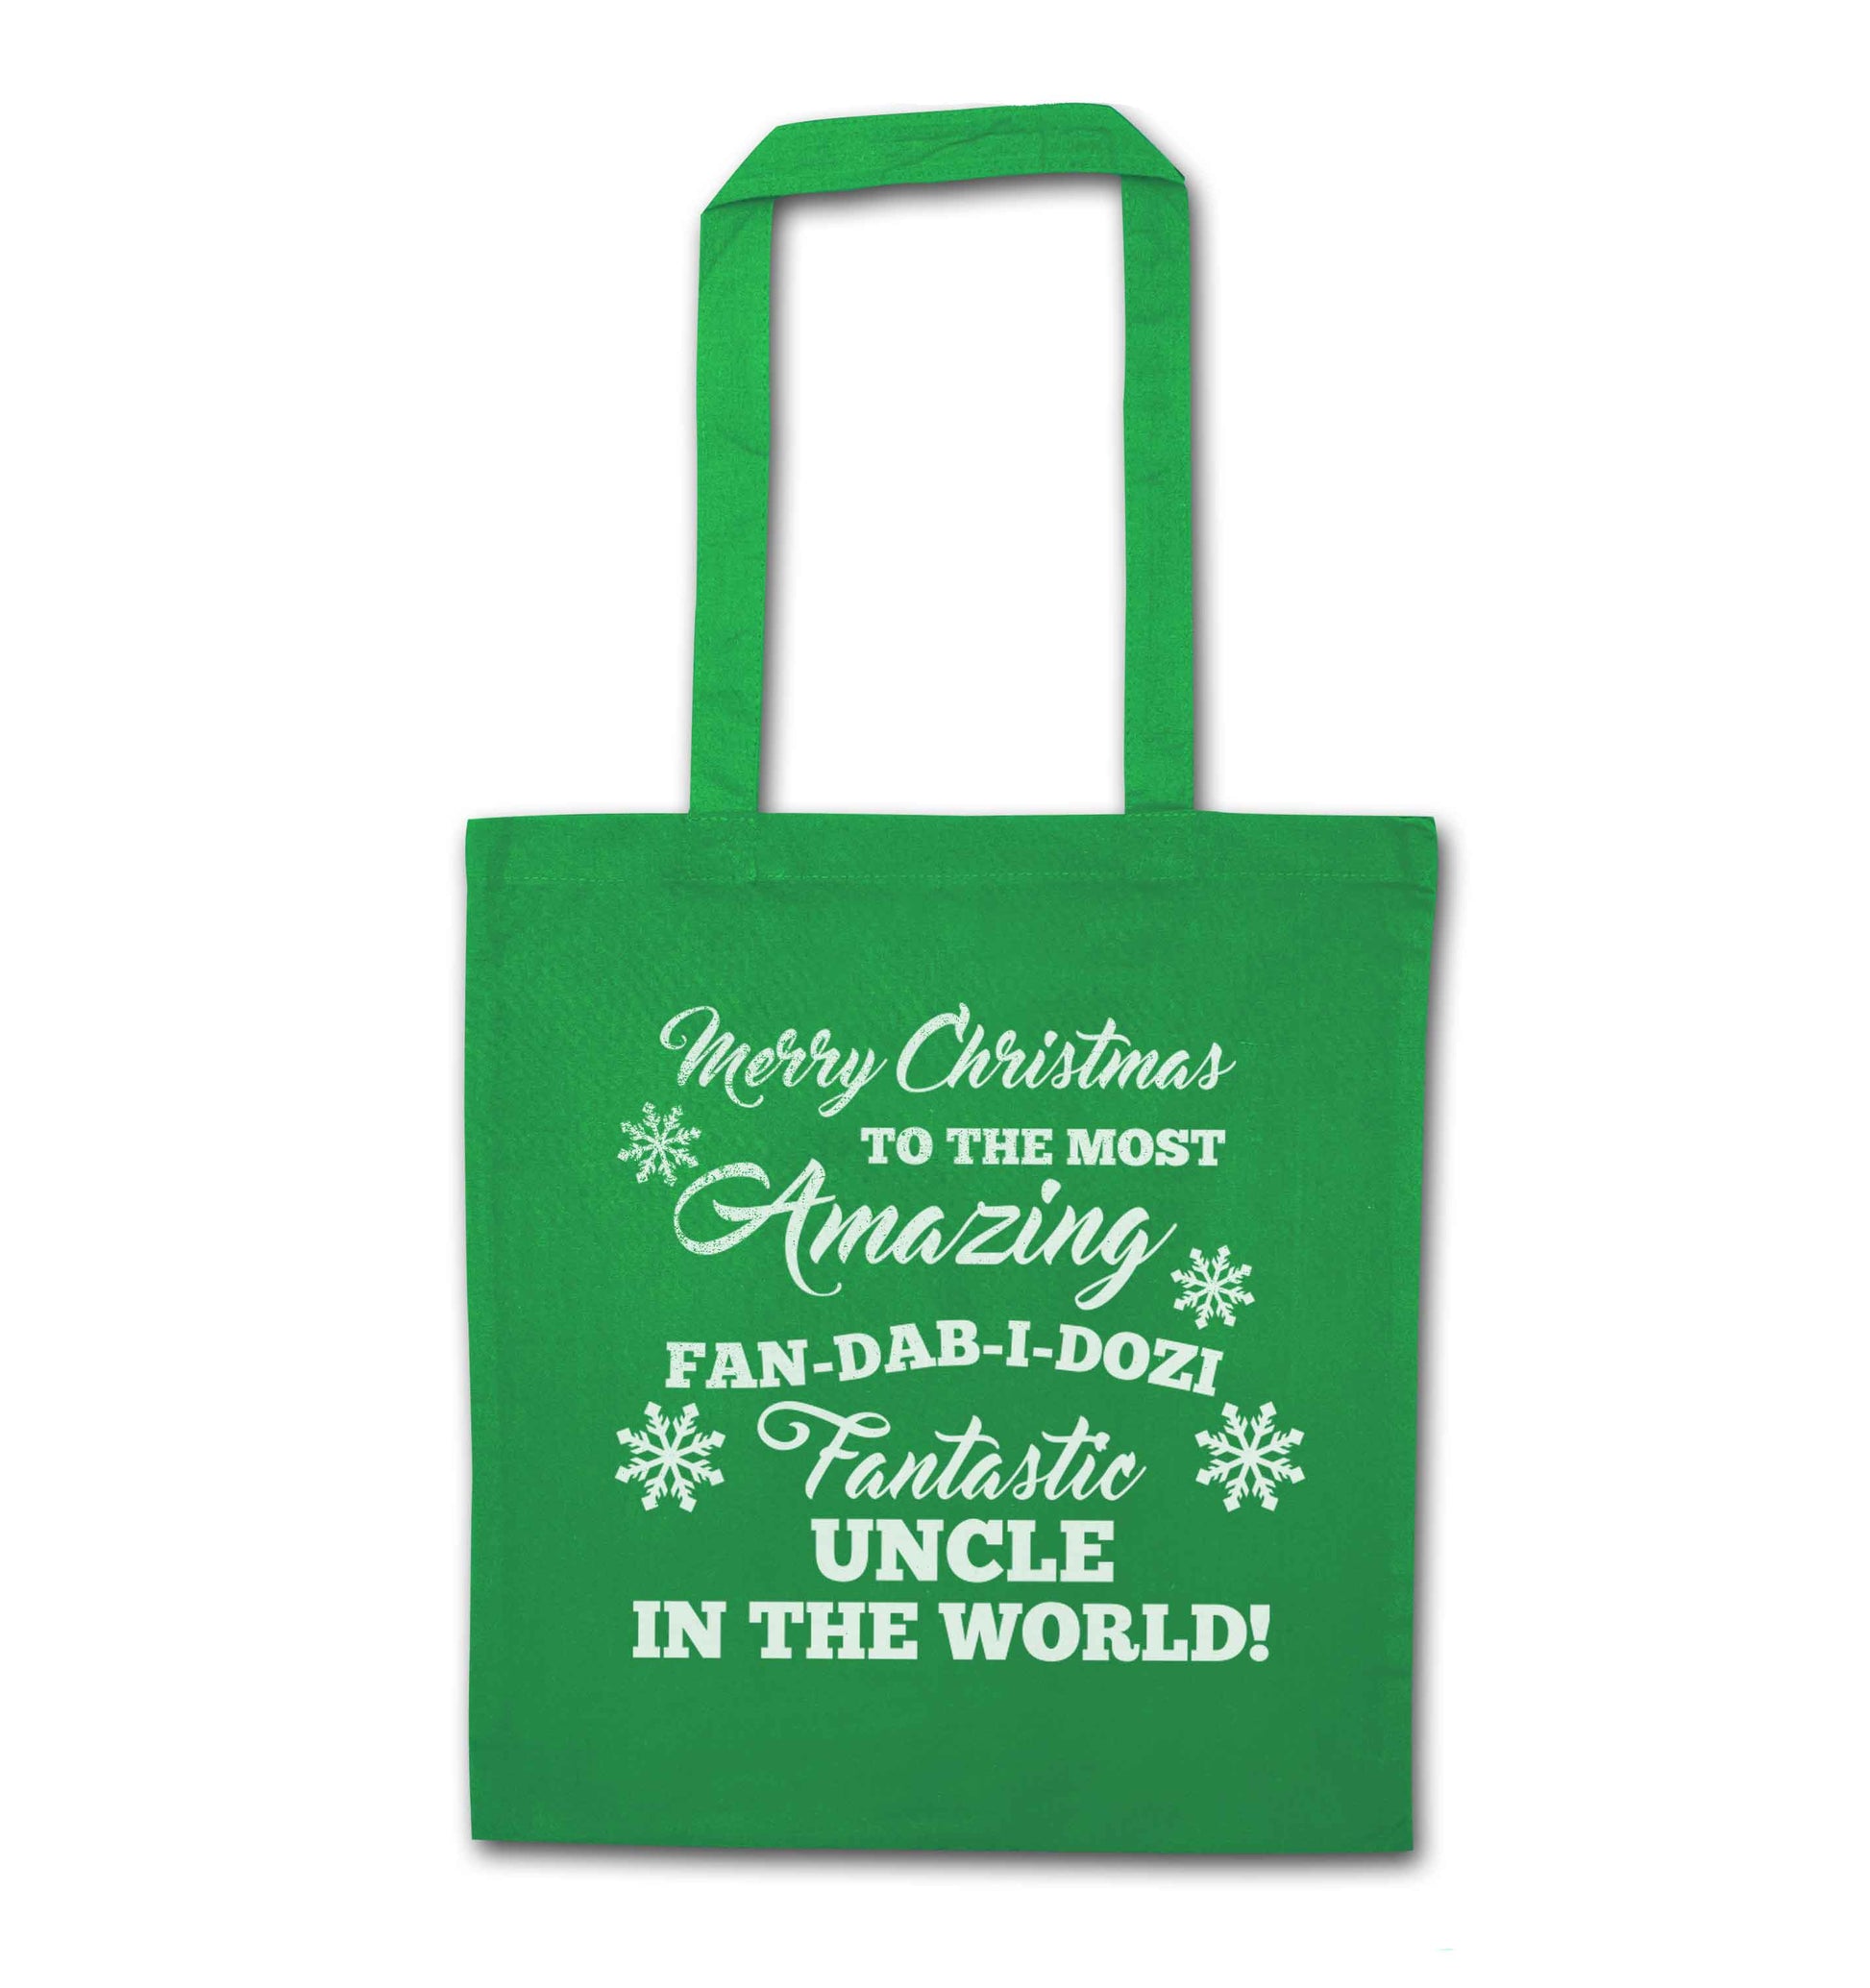 Merry Christmas to the most amazing fan-dab-i-dozi fantasic Uncle in the world green tote bag